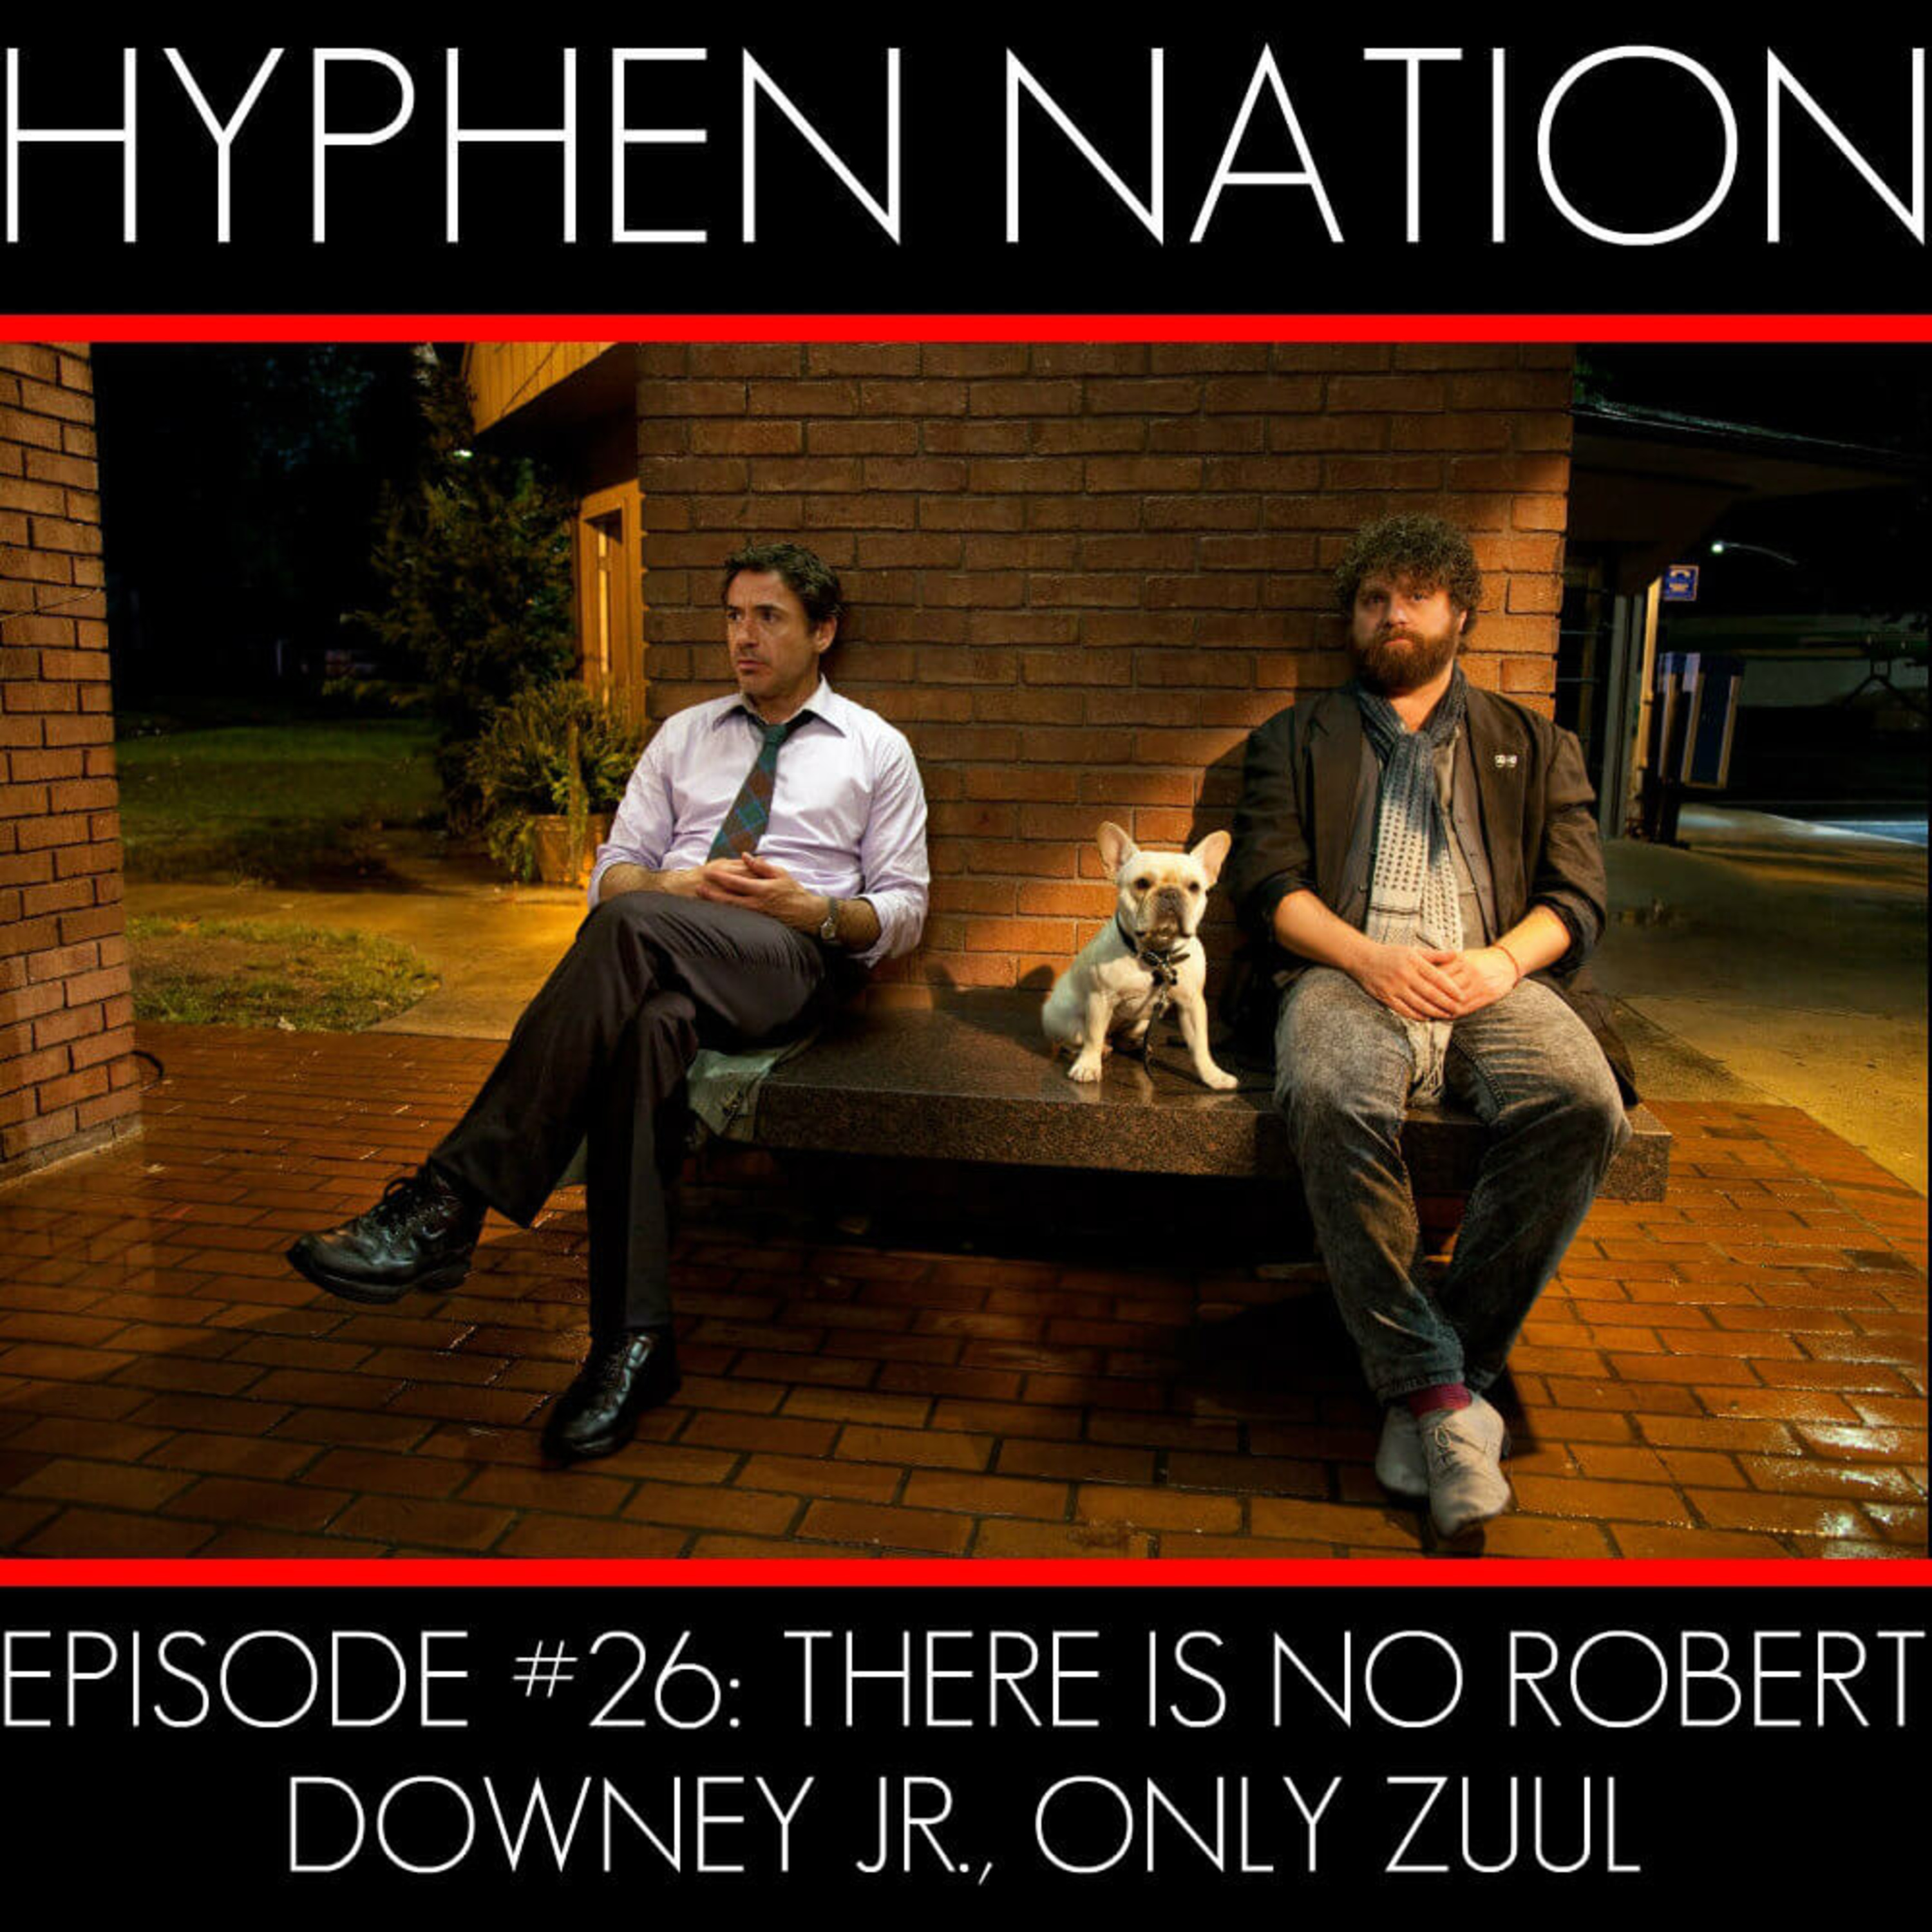 Episode #26: There Is No Robert Downey Jr., Only Zuul